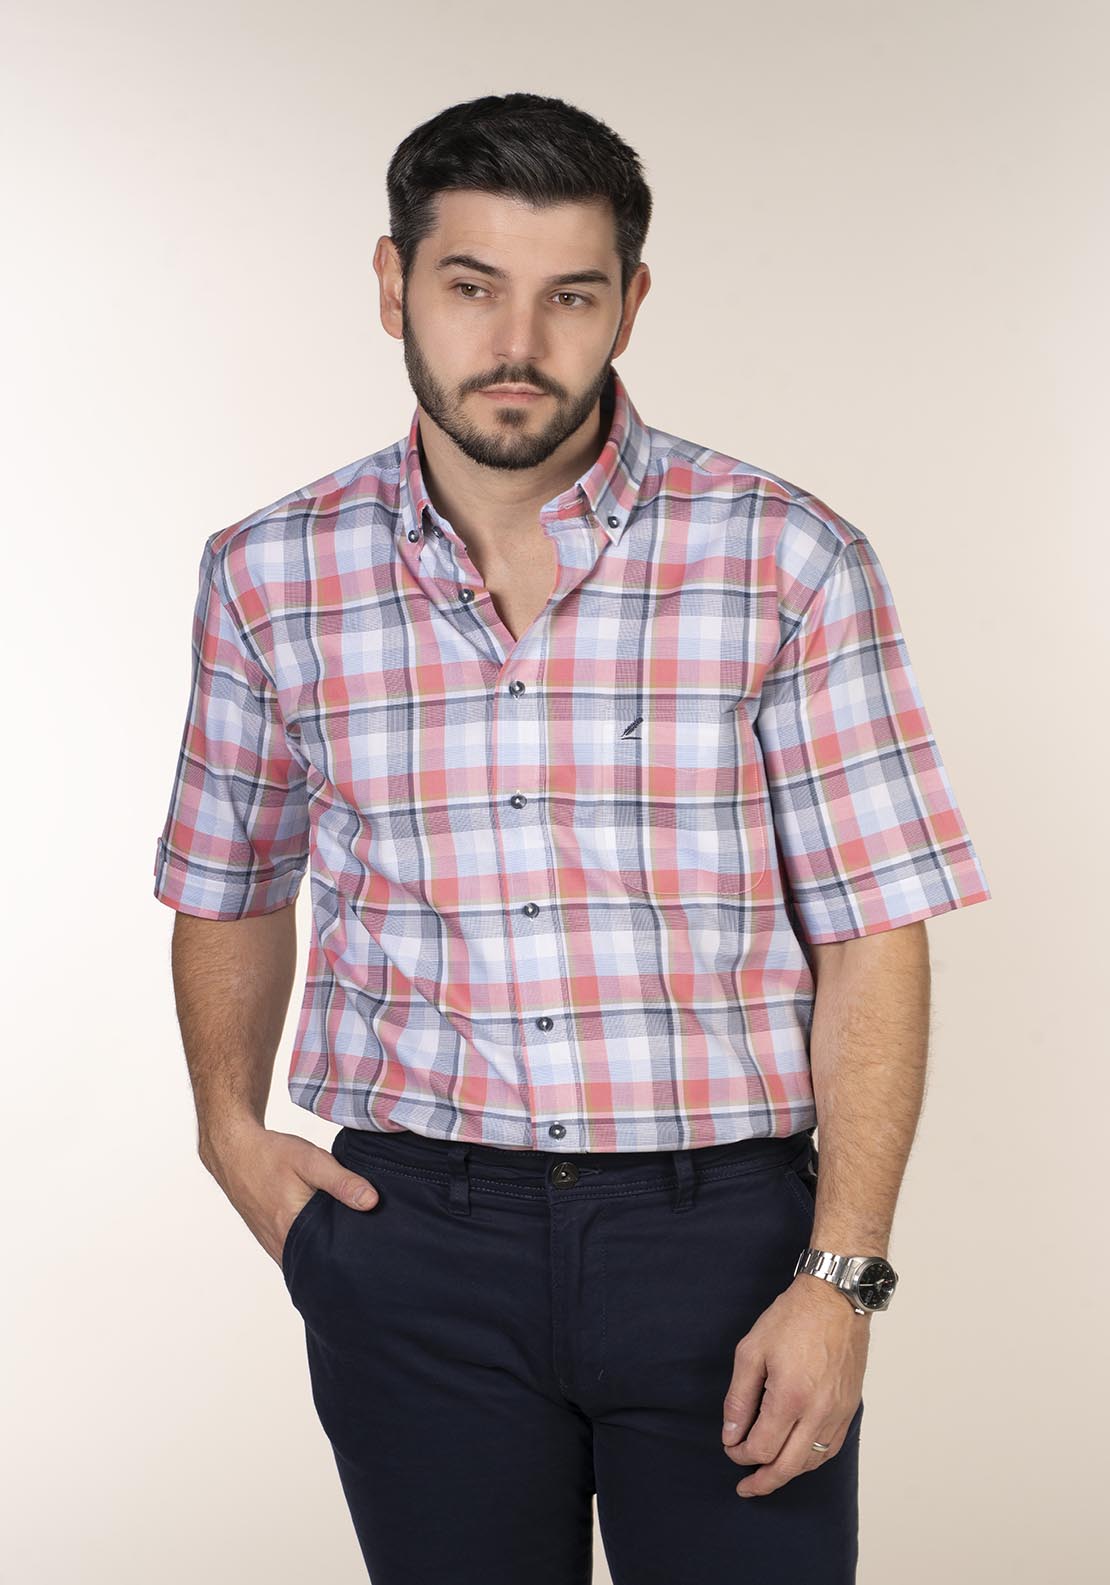 Yeats Casual Check Short Sleeve Shirt - Pink 1 Shaws Department Stores